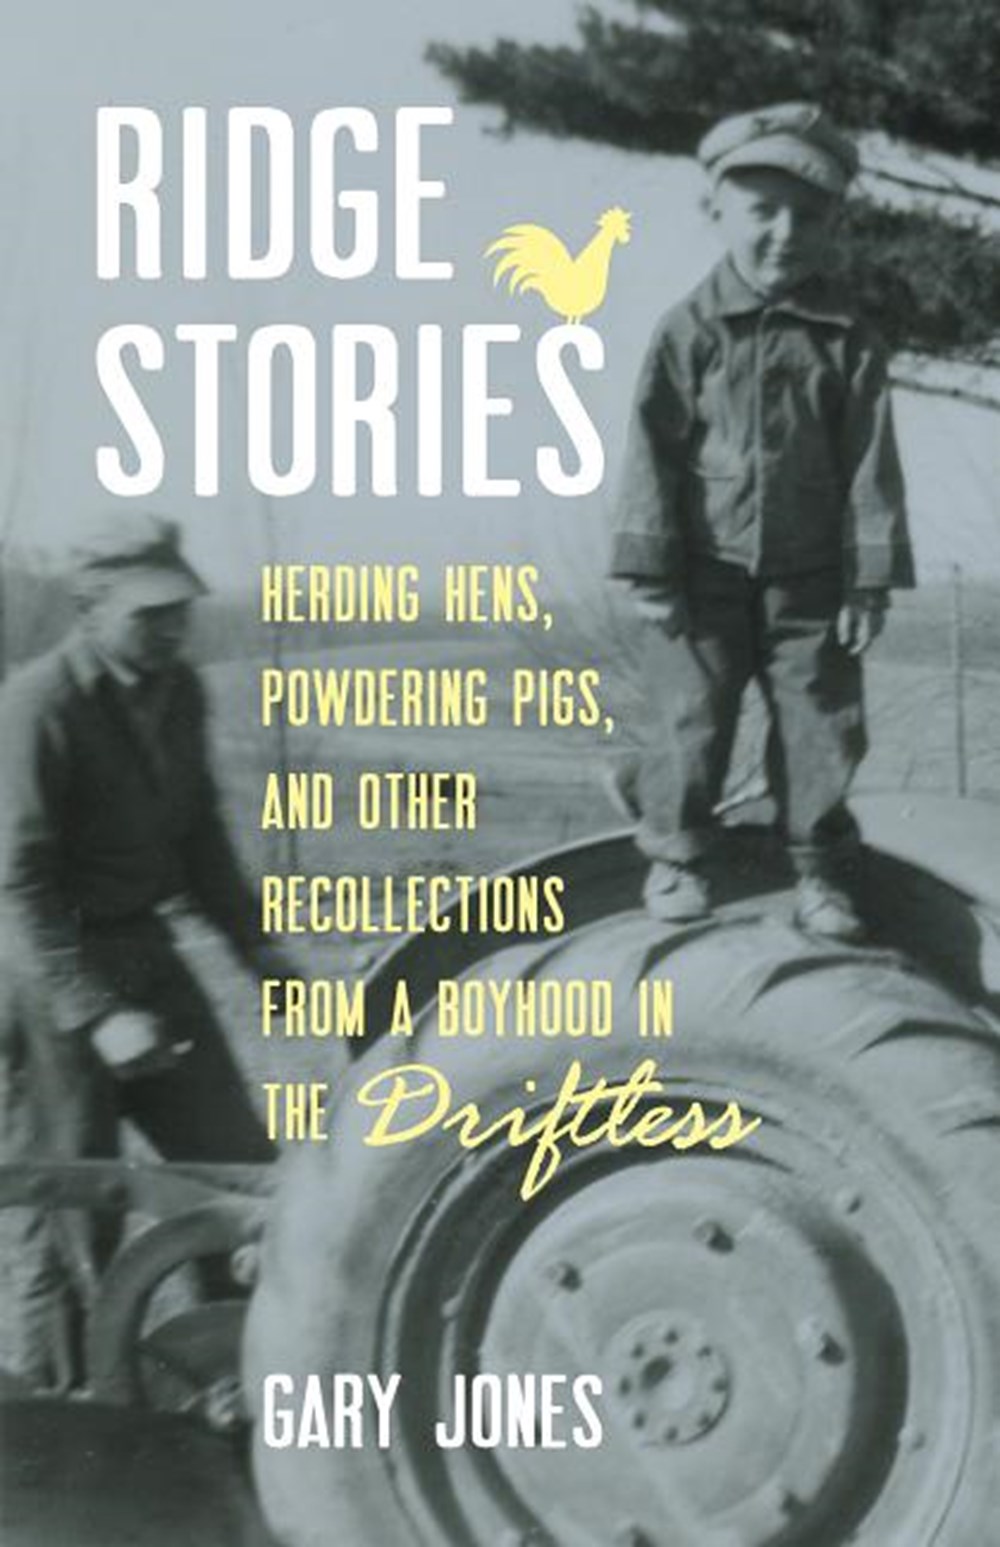 Ridge Stories: Herding Hens, Powdering Pigs, and Other Recollections from a Boyhood in the Driftless